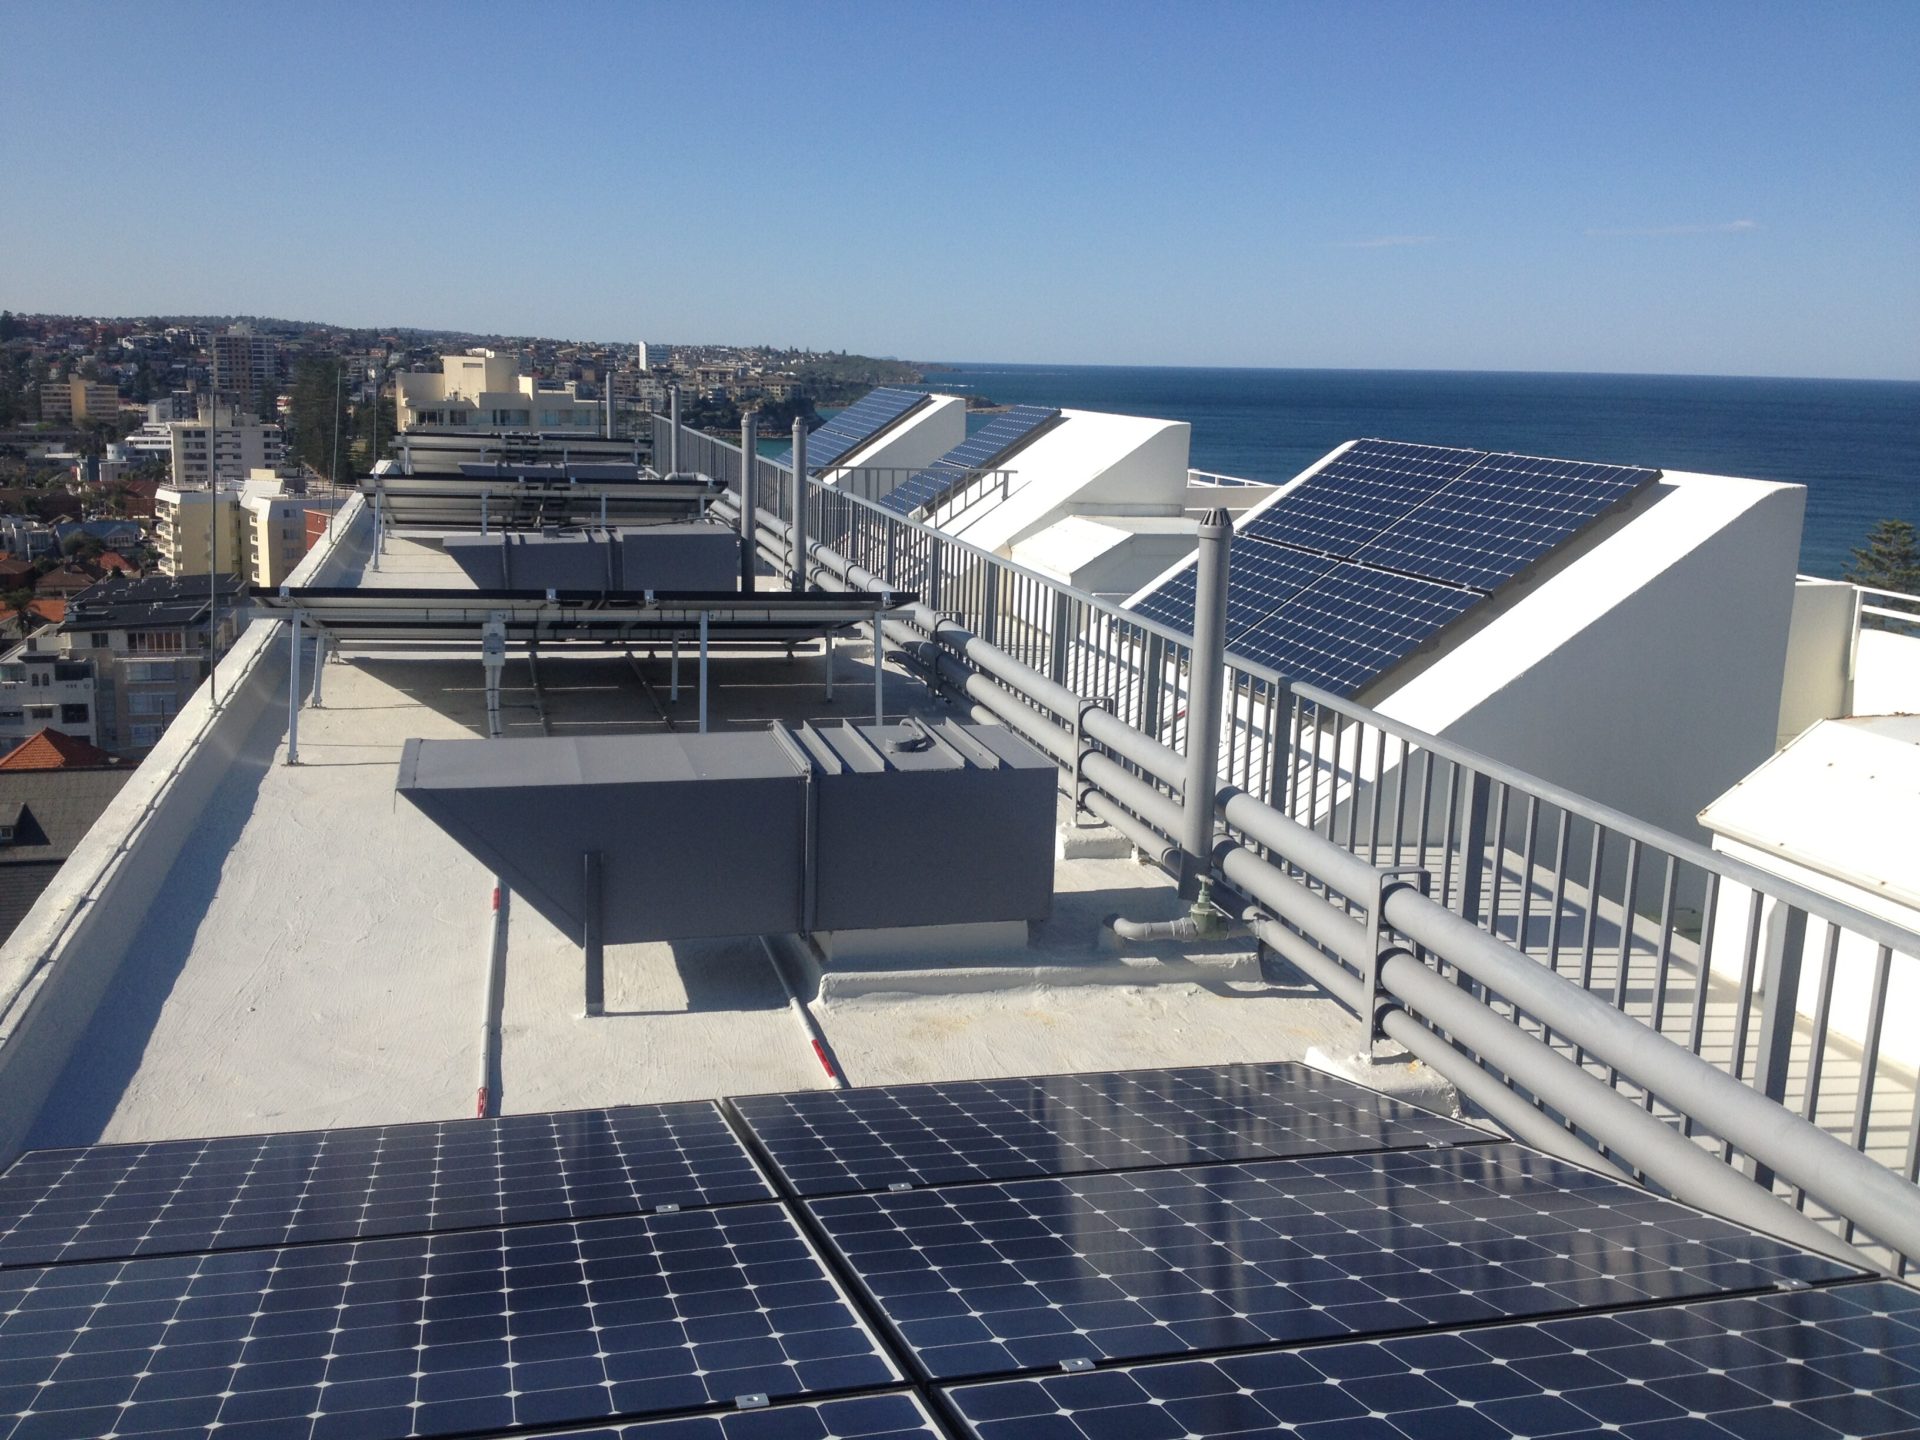 Solar power installed on strata building in Manly, NSW